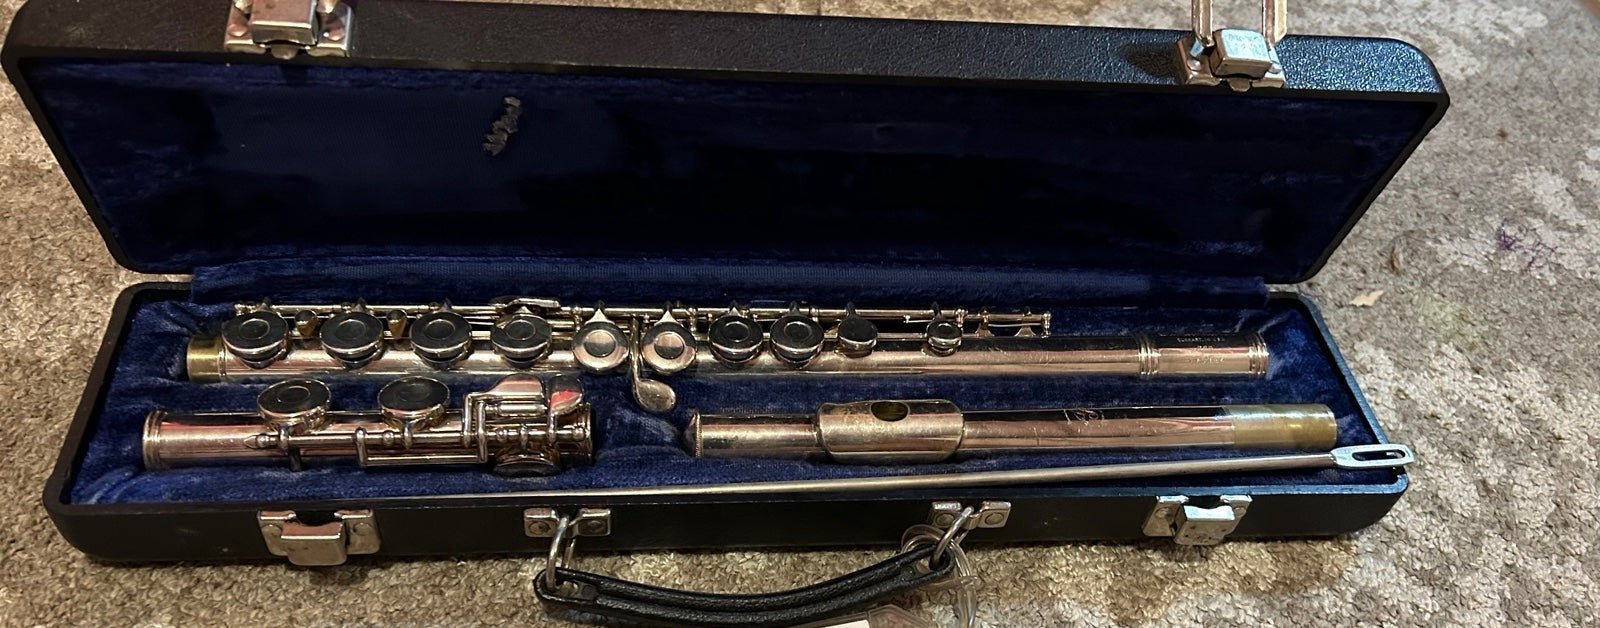 A flute with case free shipping 2IOKF9YS8